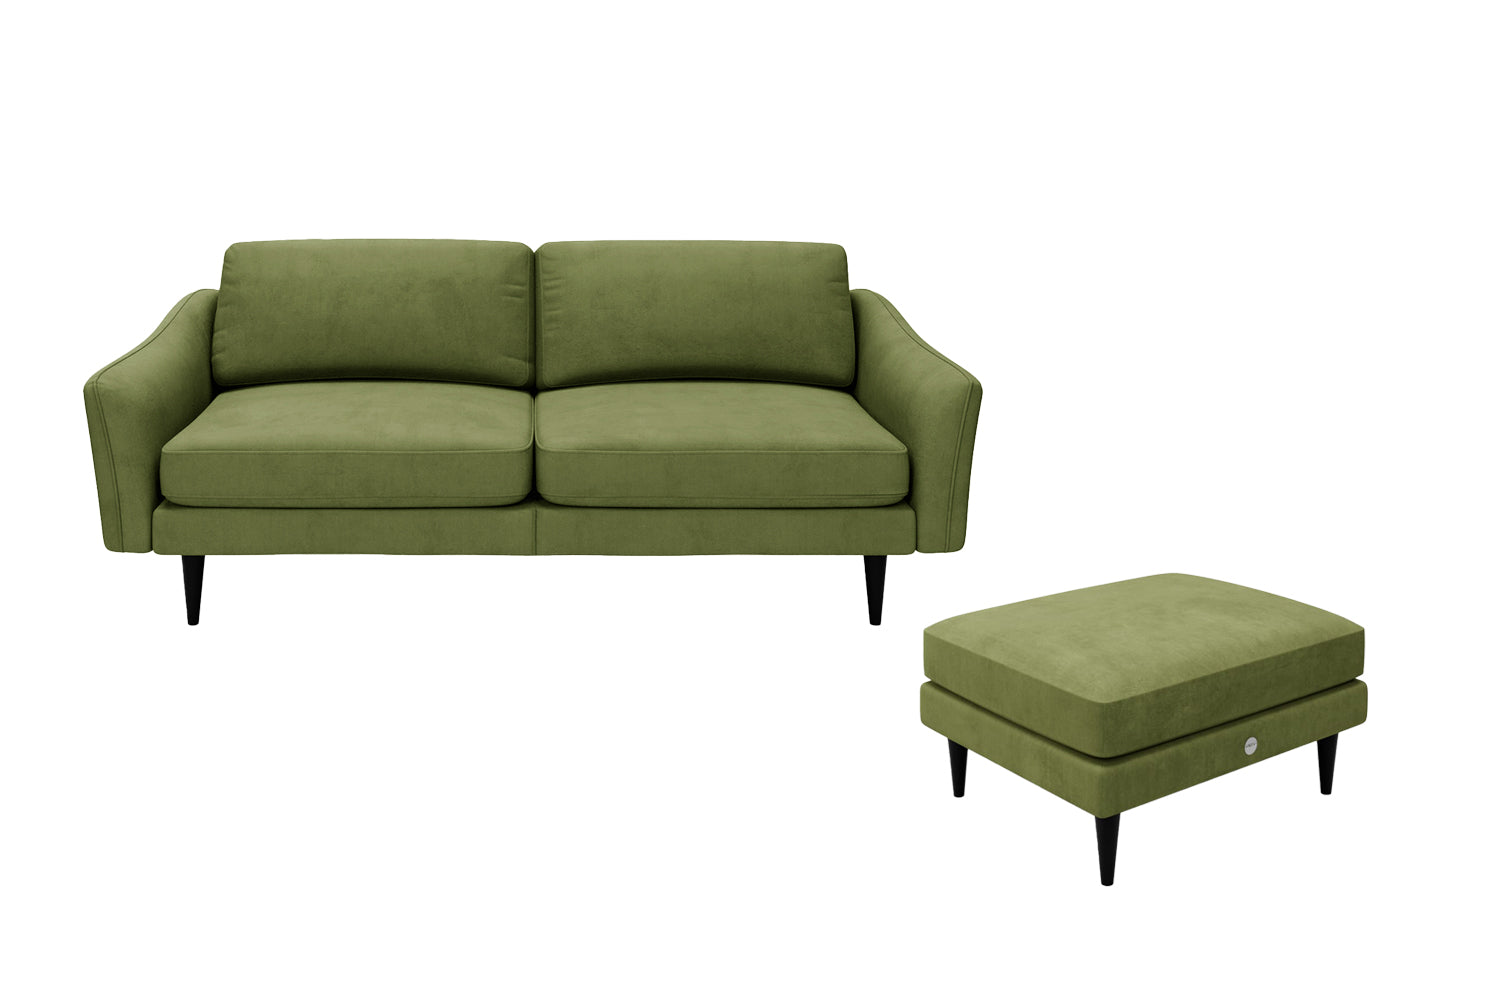 The Rebel - 3 Seater Sofa and Footstool Set - Olive